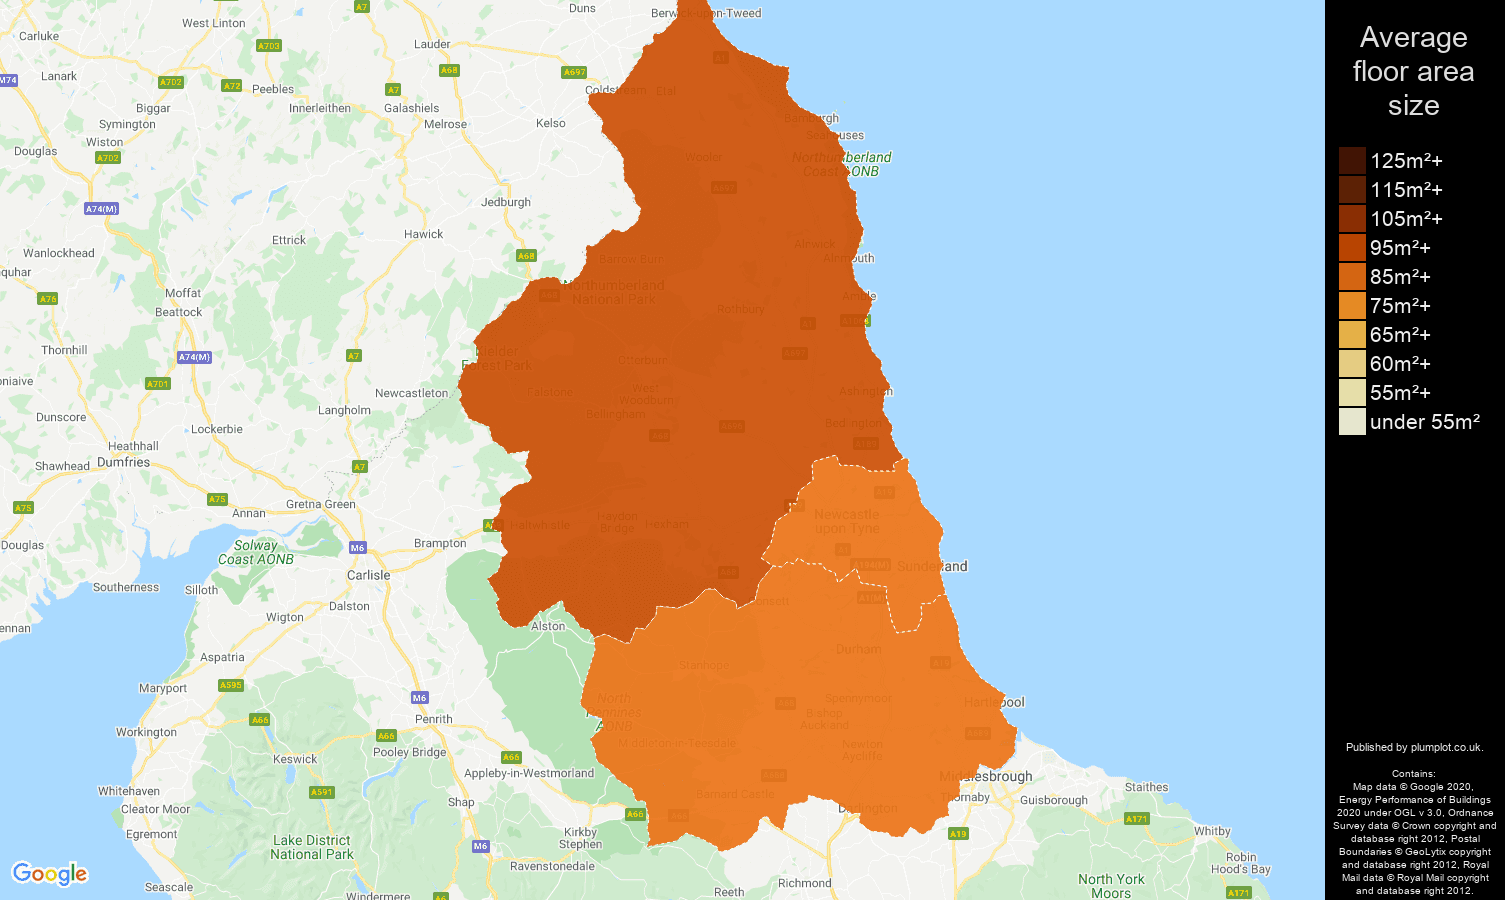 North East map of average floor area size of houses